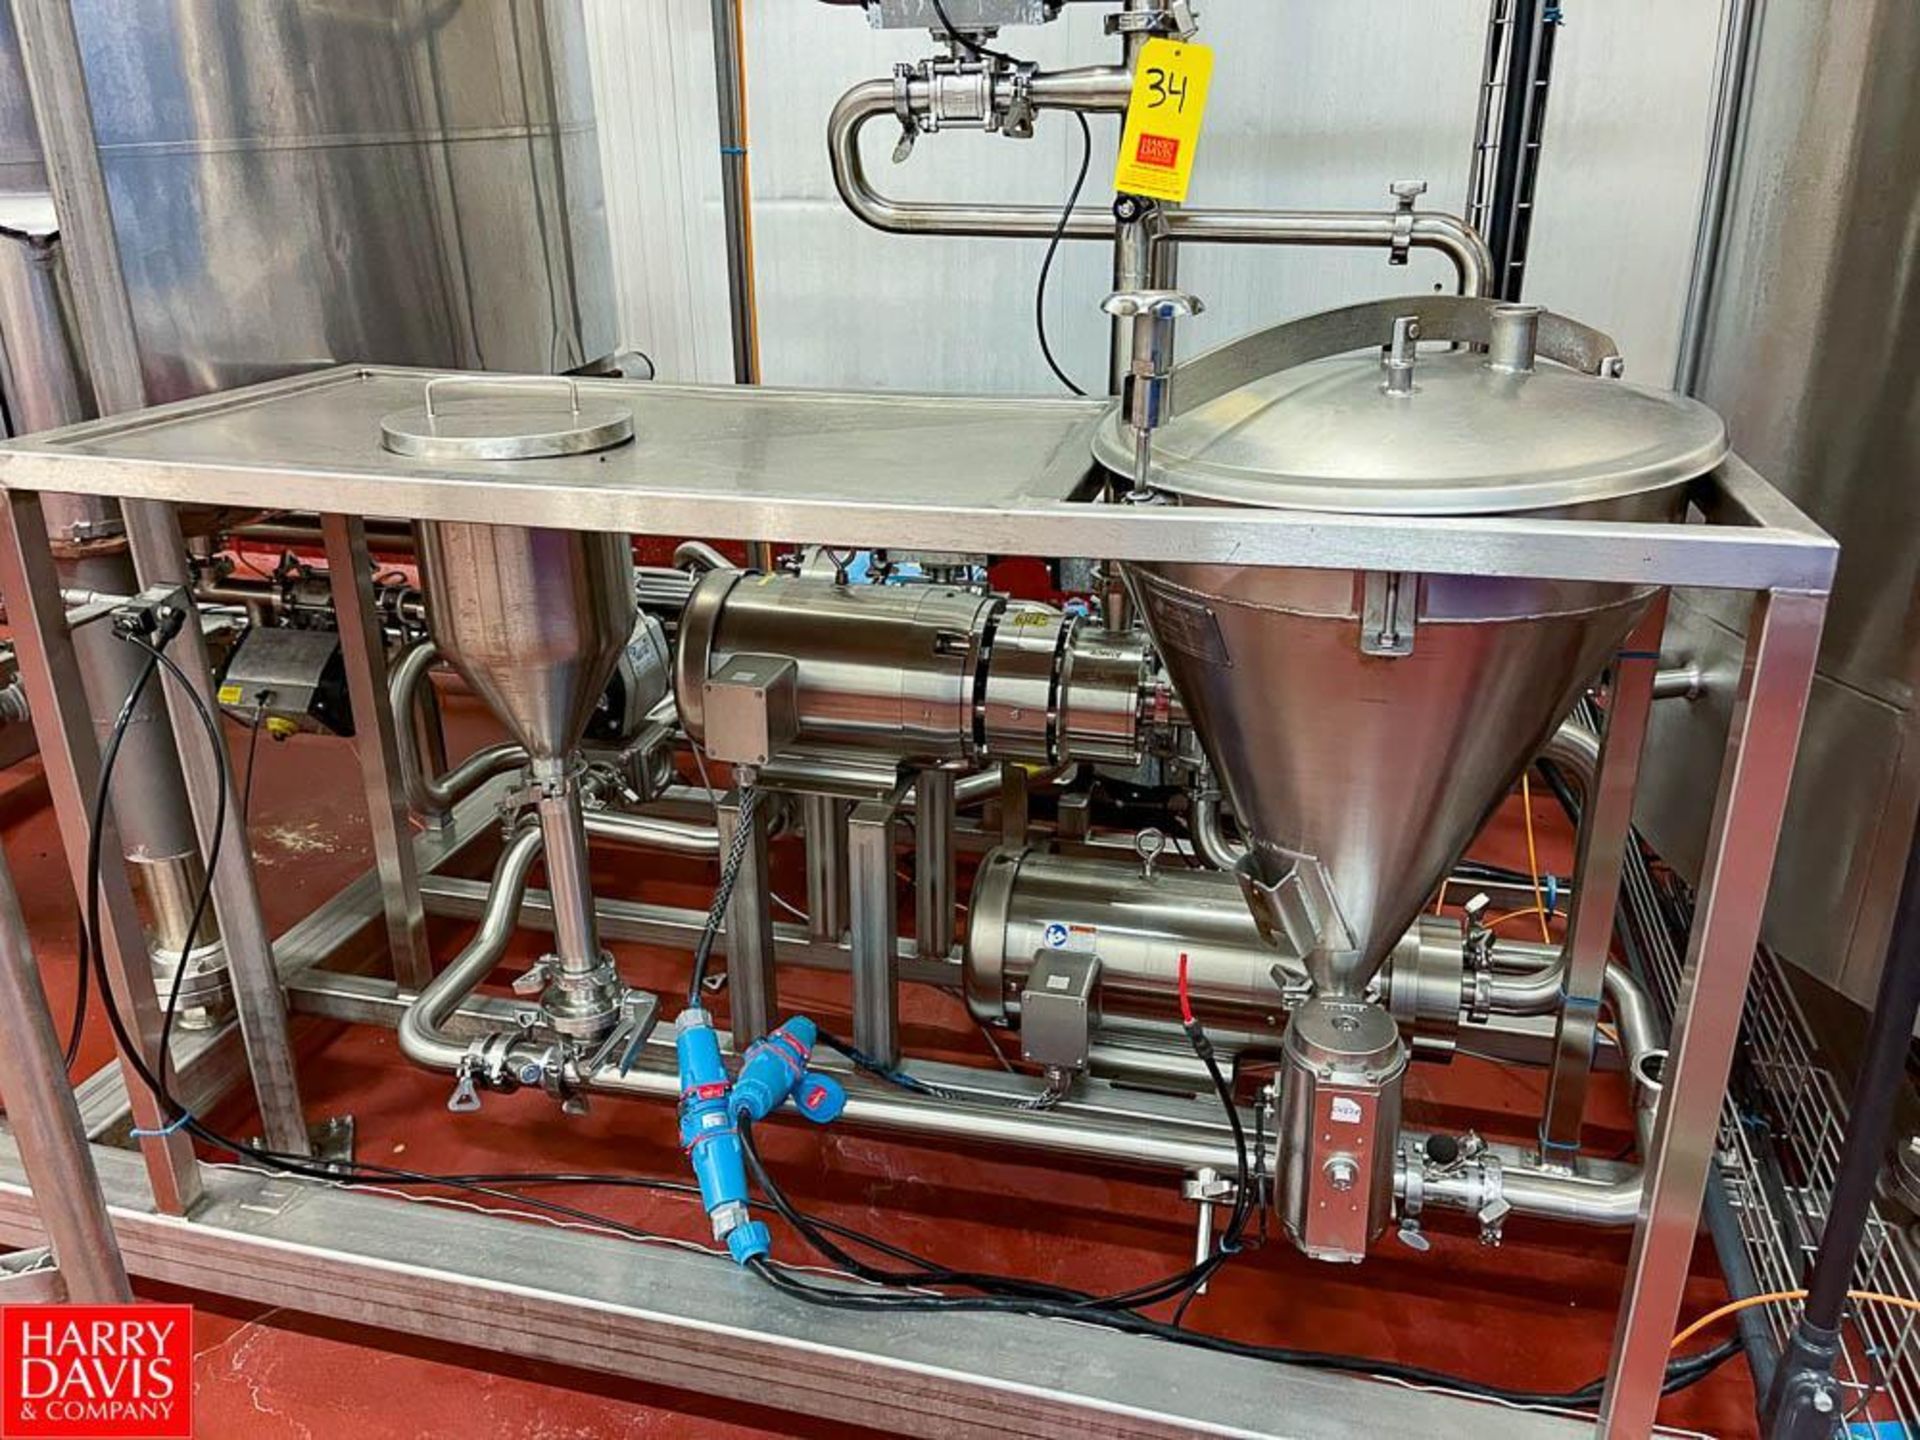 2019 Admix Powder Blending System with Admix Dynashear DS-425 and SPX 2065LR Pumps and S/S Cone Hopp - Image 2 of 4